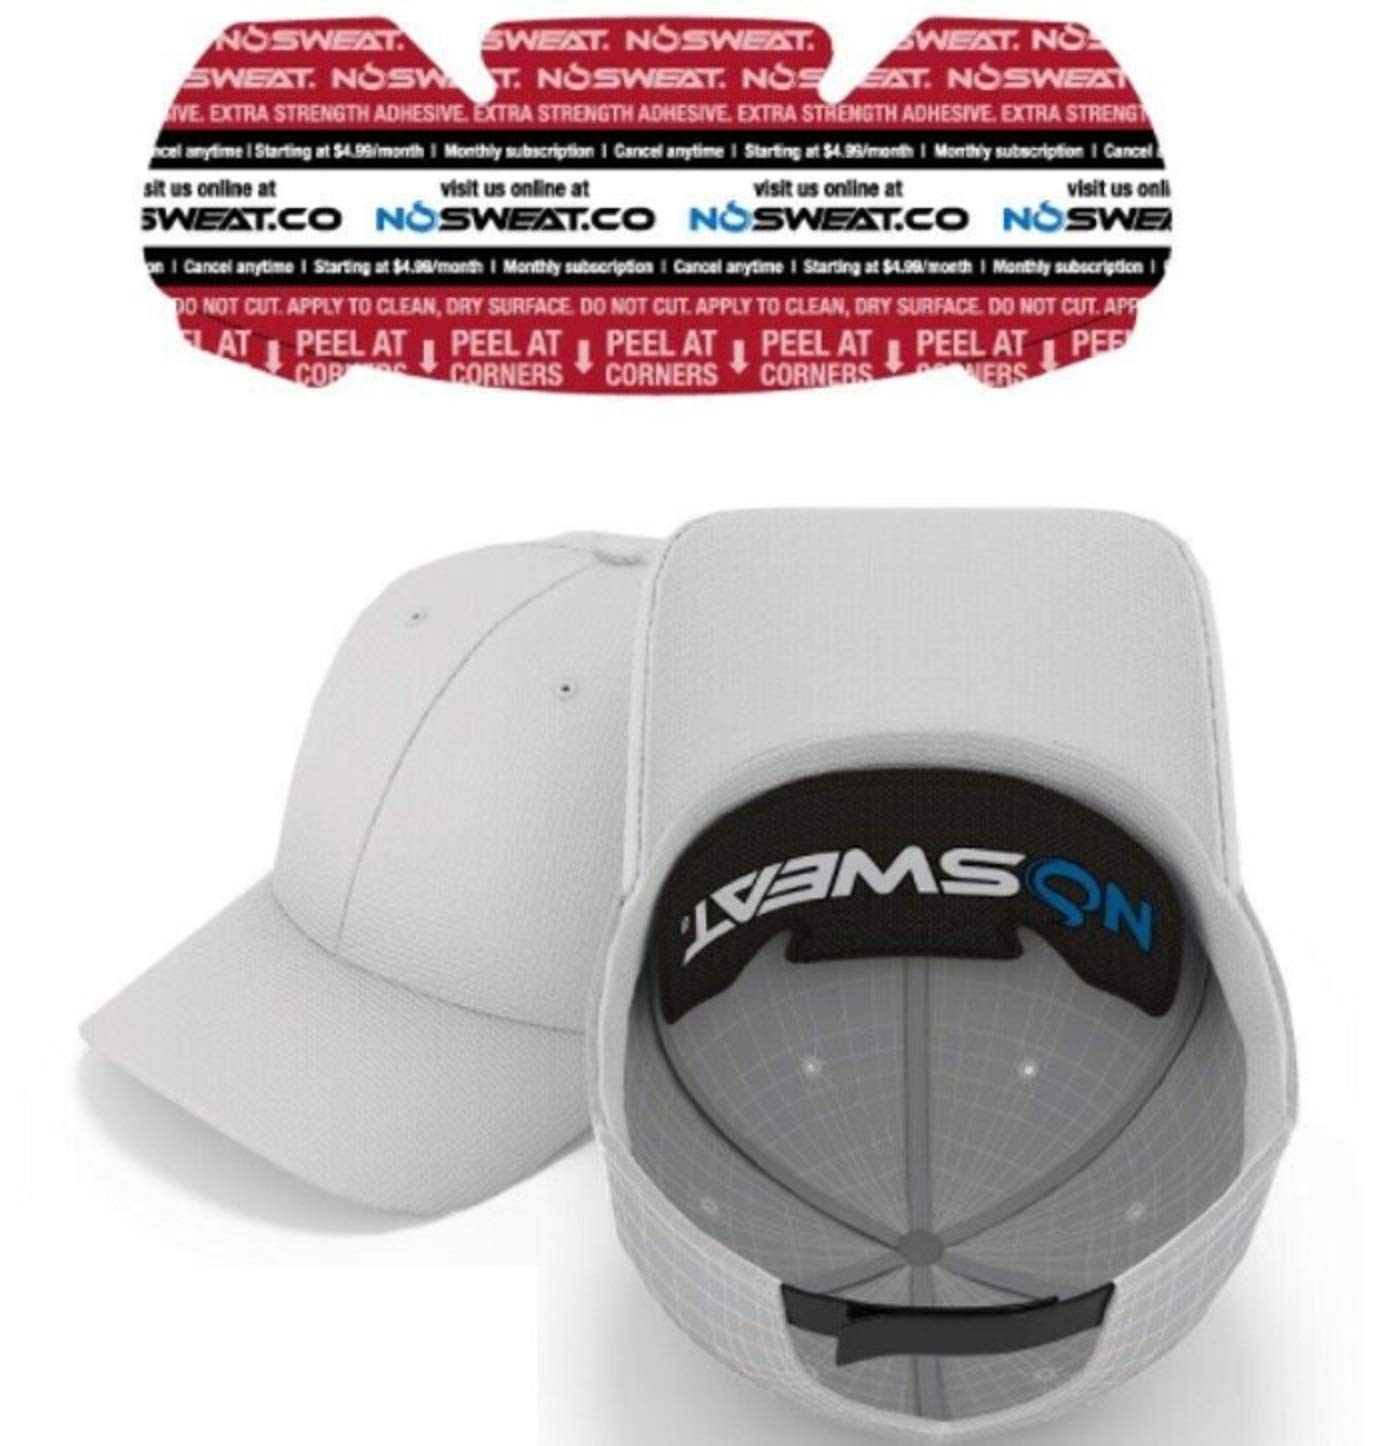 Golf Hat Sweat Liner Made in The USA - Prevents Stains & Odor